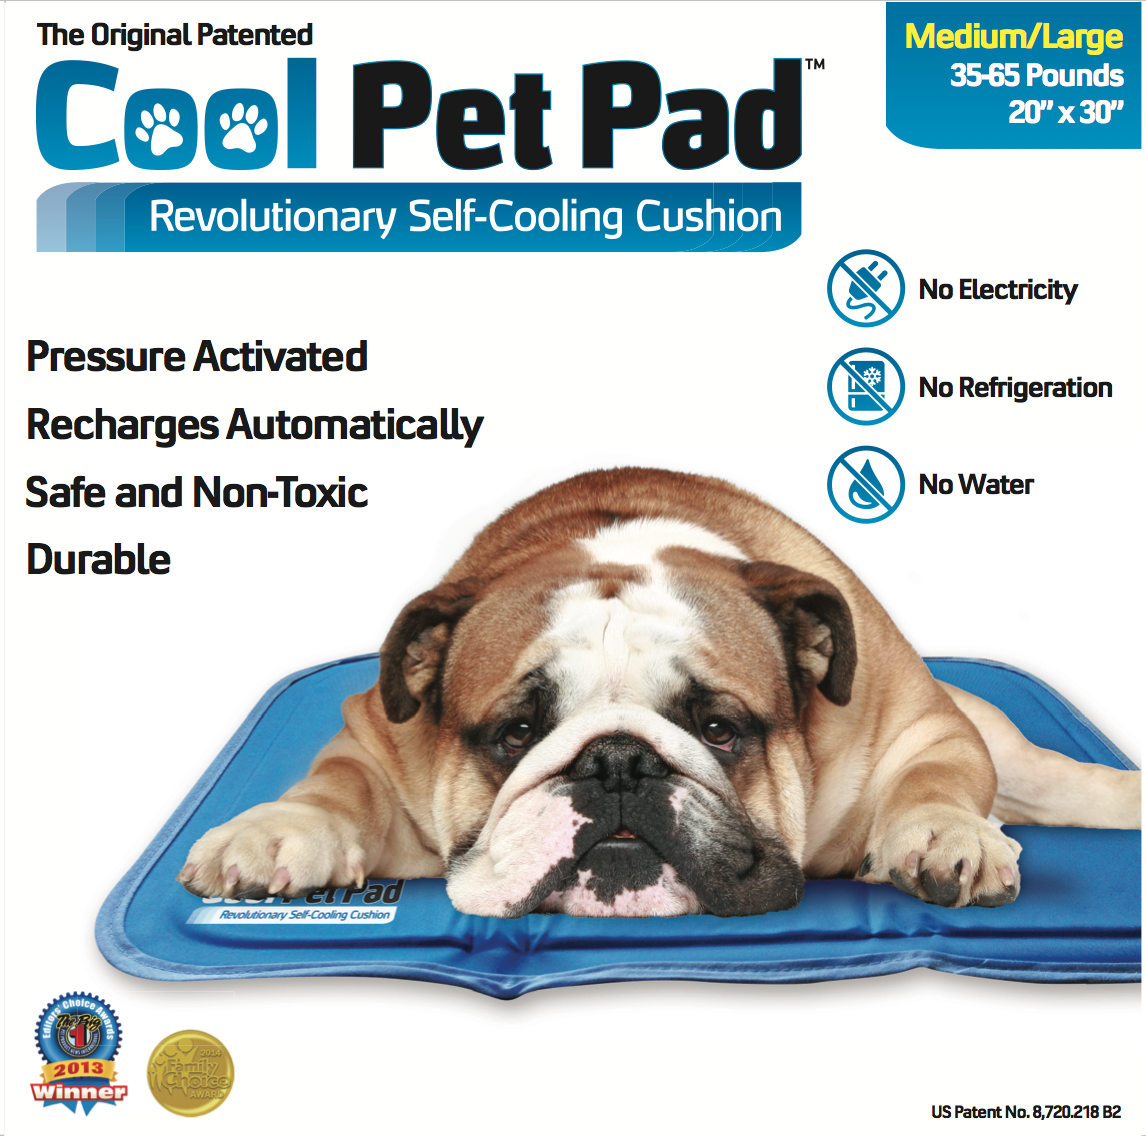 The Original Patented Cool Pet Pad. No Water. No Refrigeration. By RSM Group